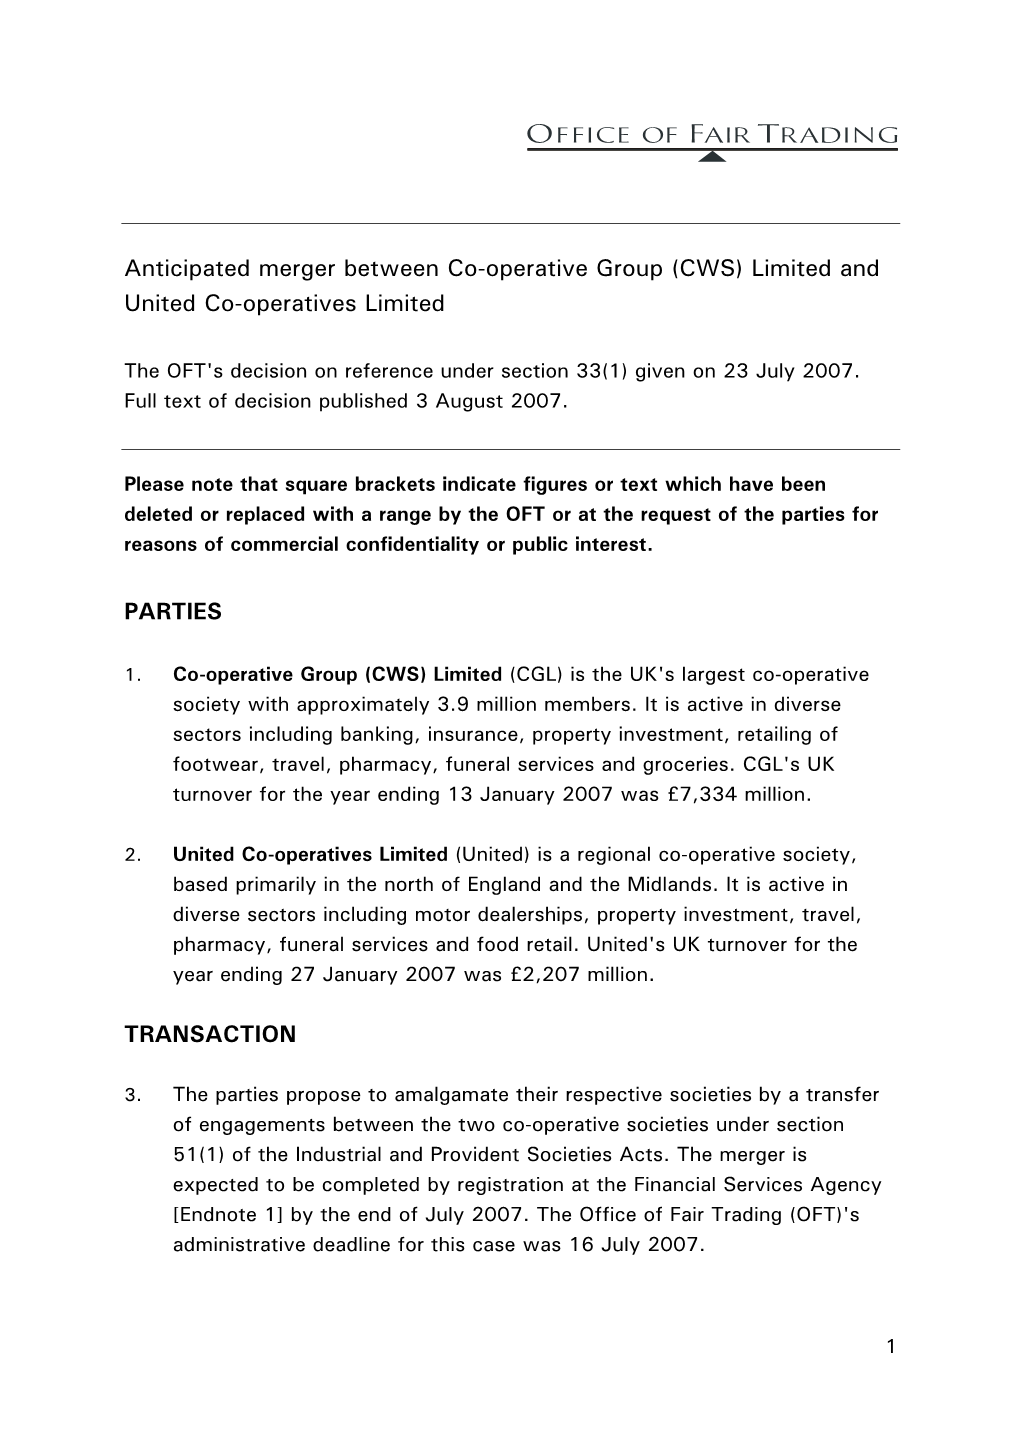 Anticipated Merger Between Co-Operative Group (CWS) Limited and United Co-Operatives Limited